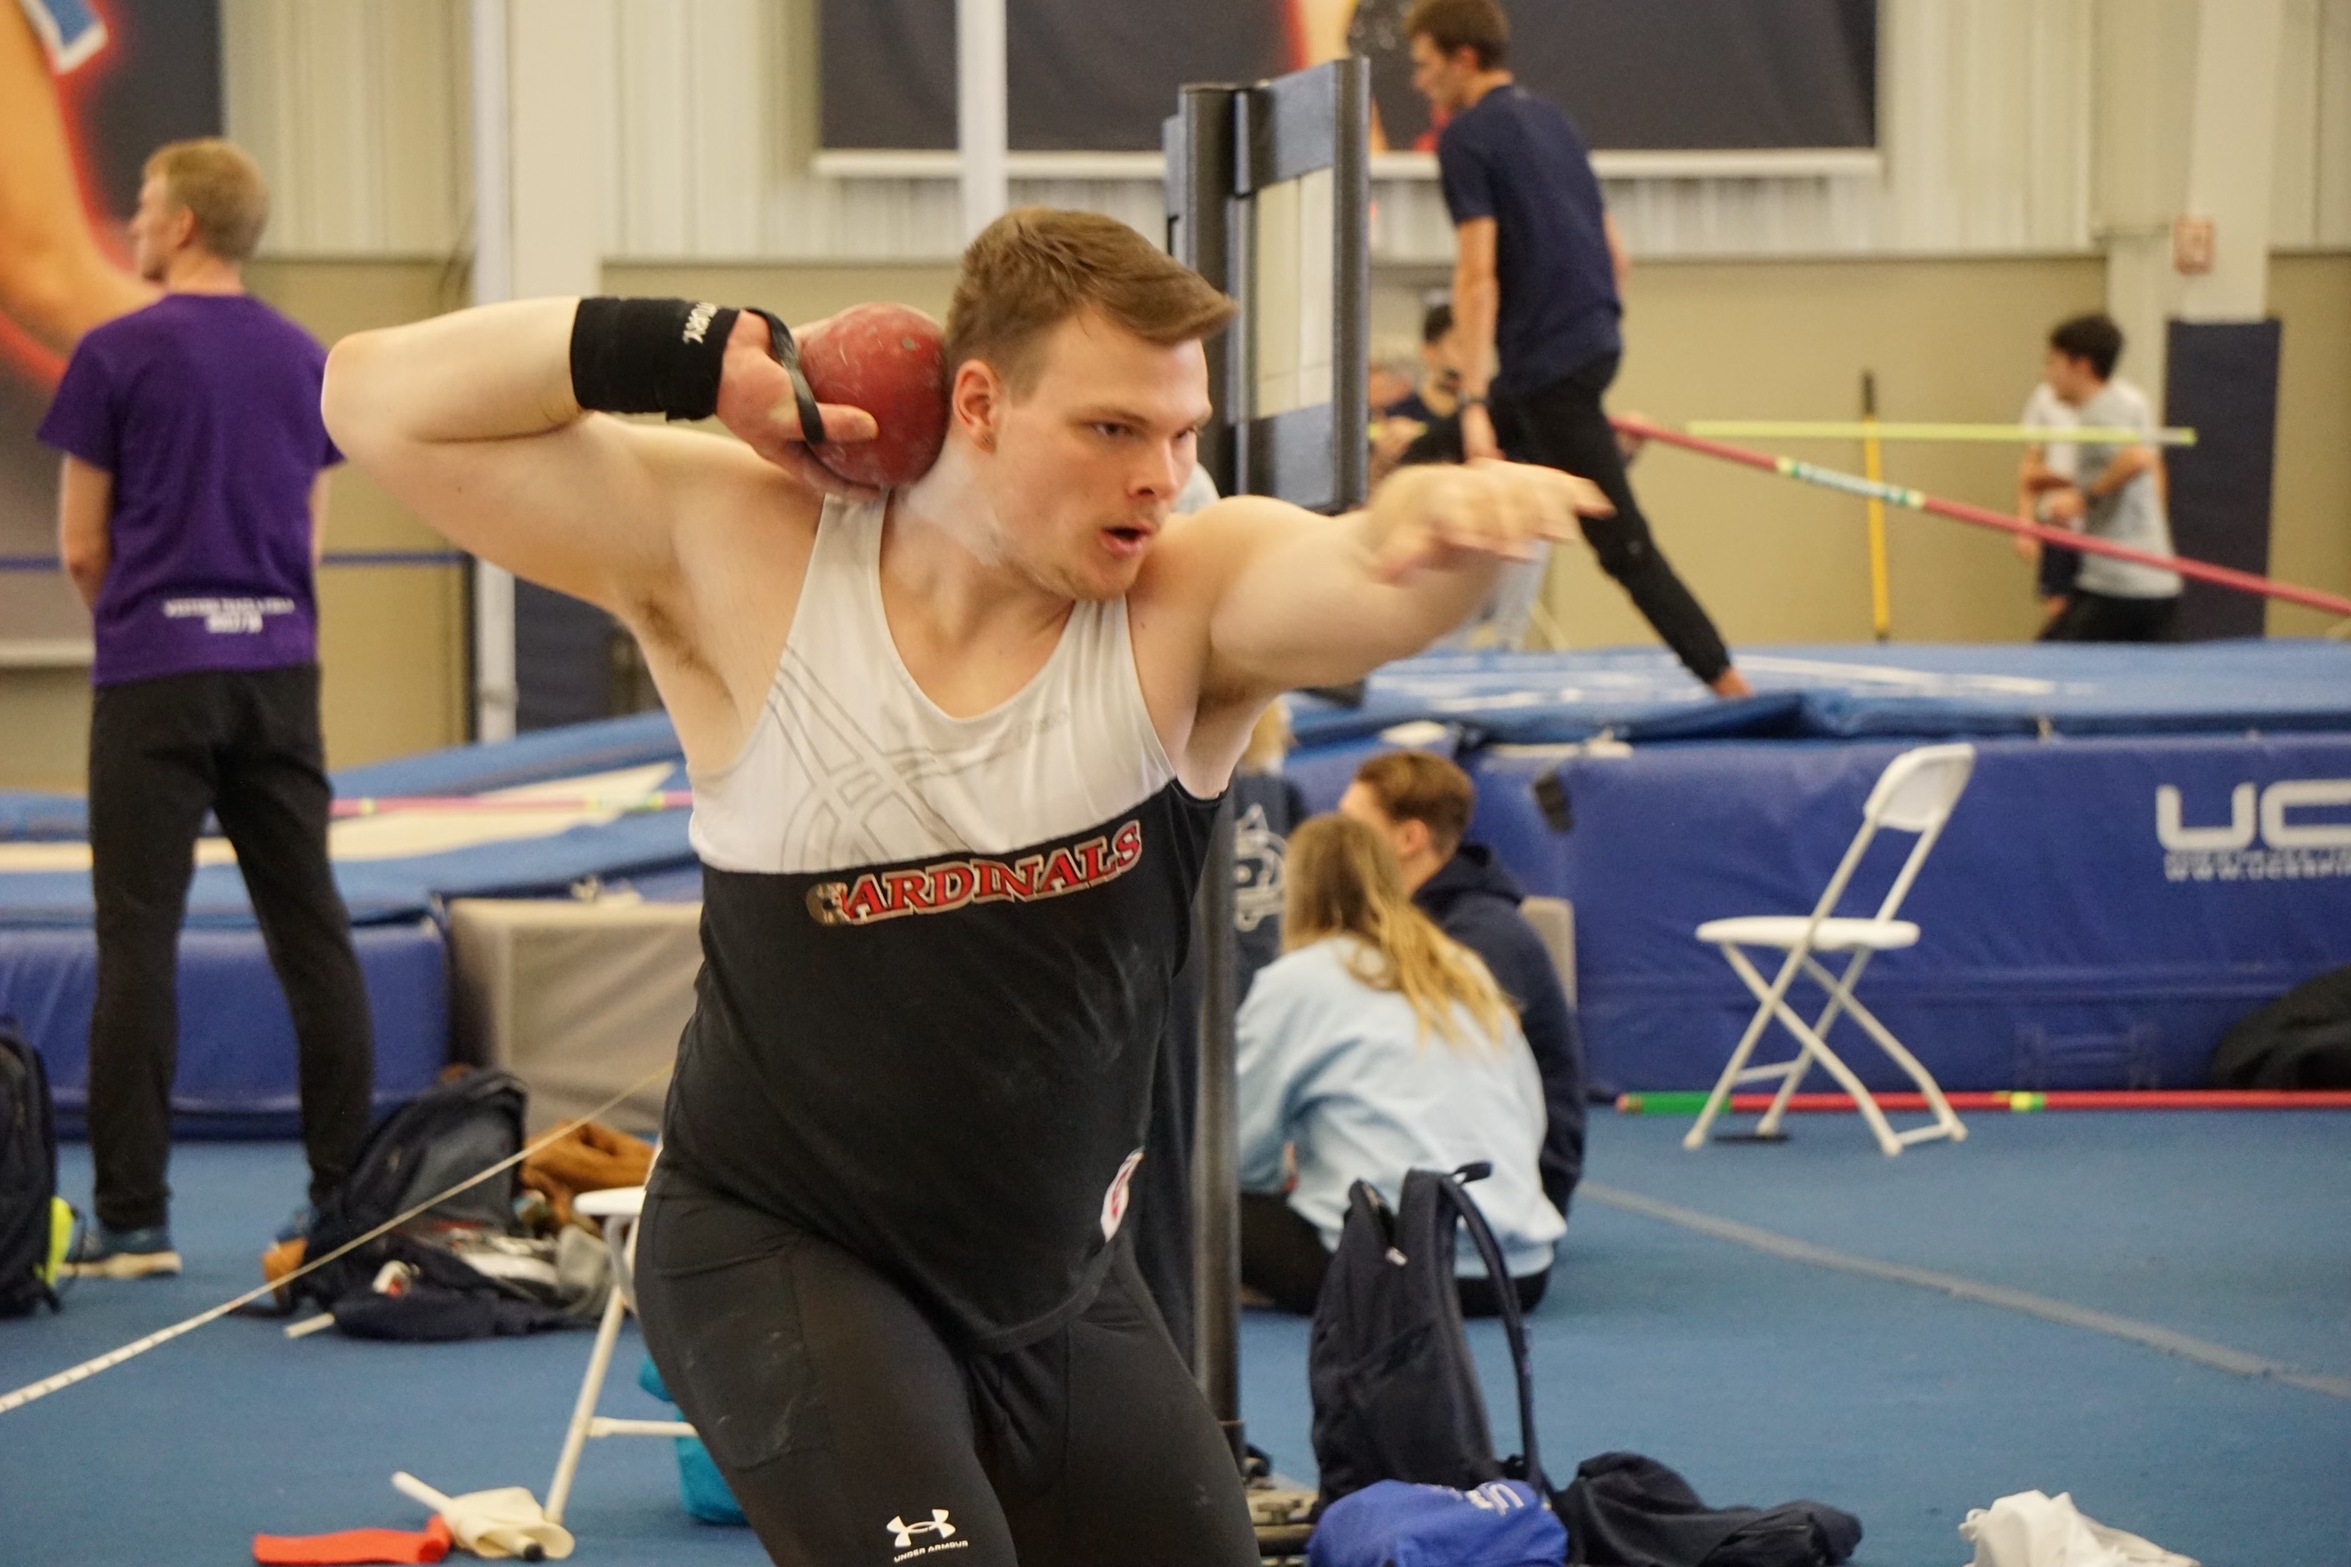 Men's Track and Field competes at the Hillsdale Wide Track Classic; Starkey takes home 400m win